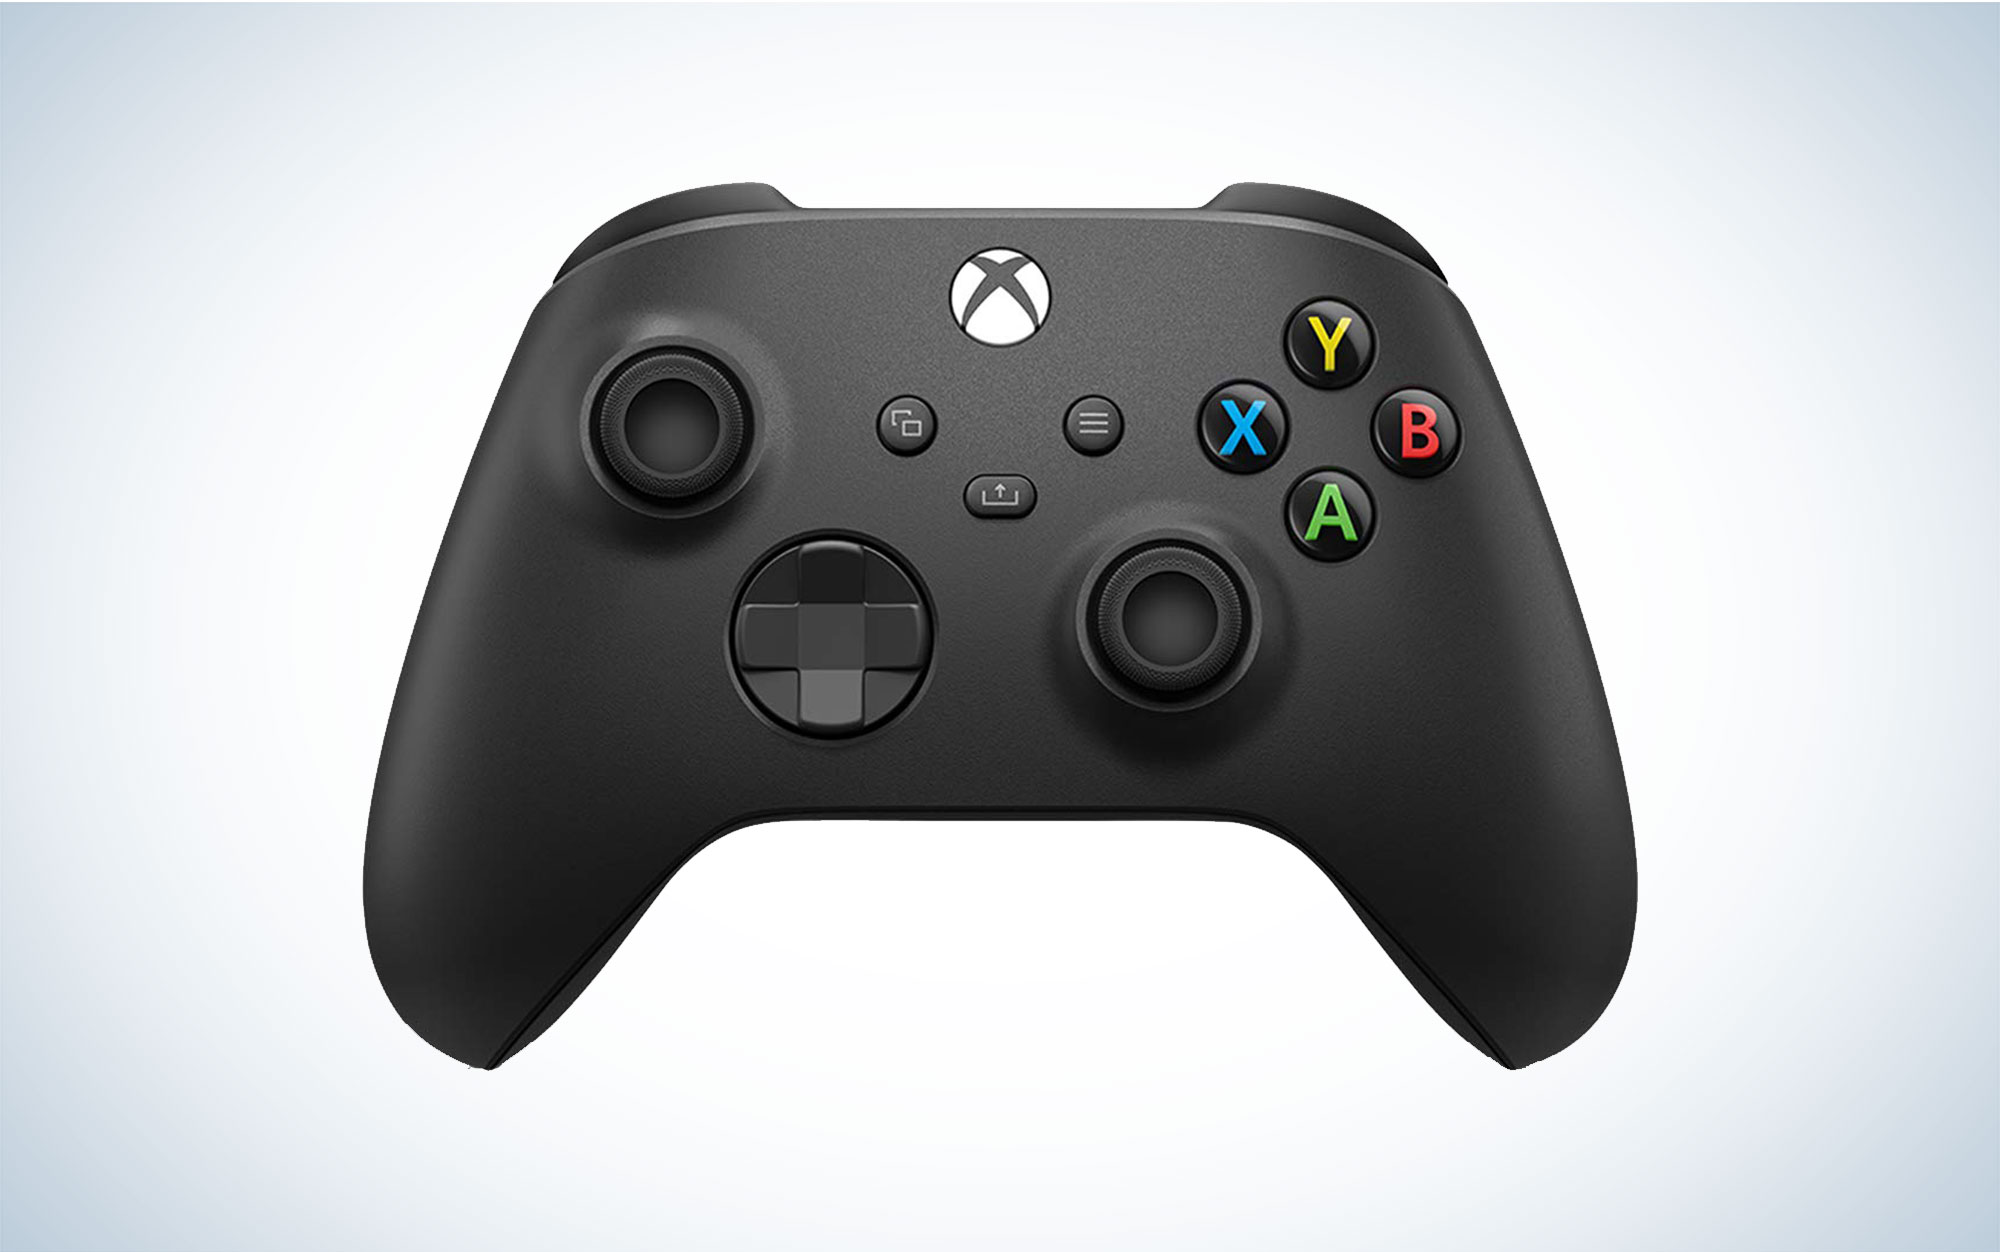 The Xbox Wireless Controller is the best Xbox One Controller.